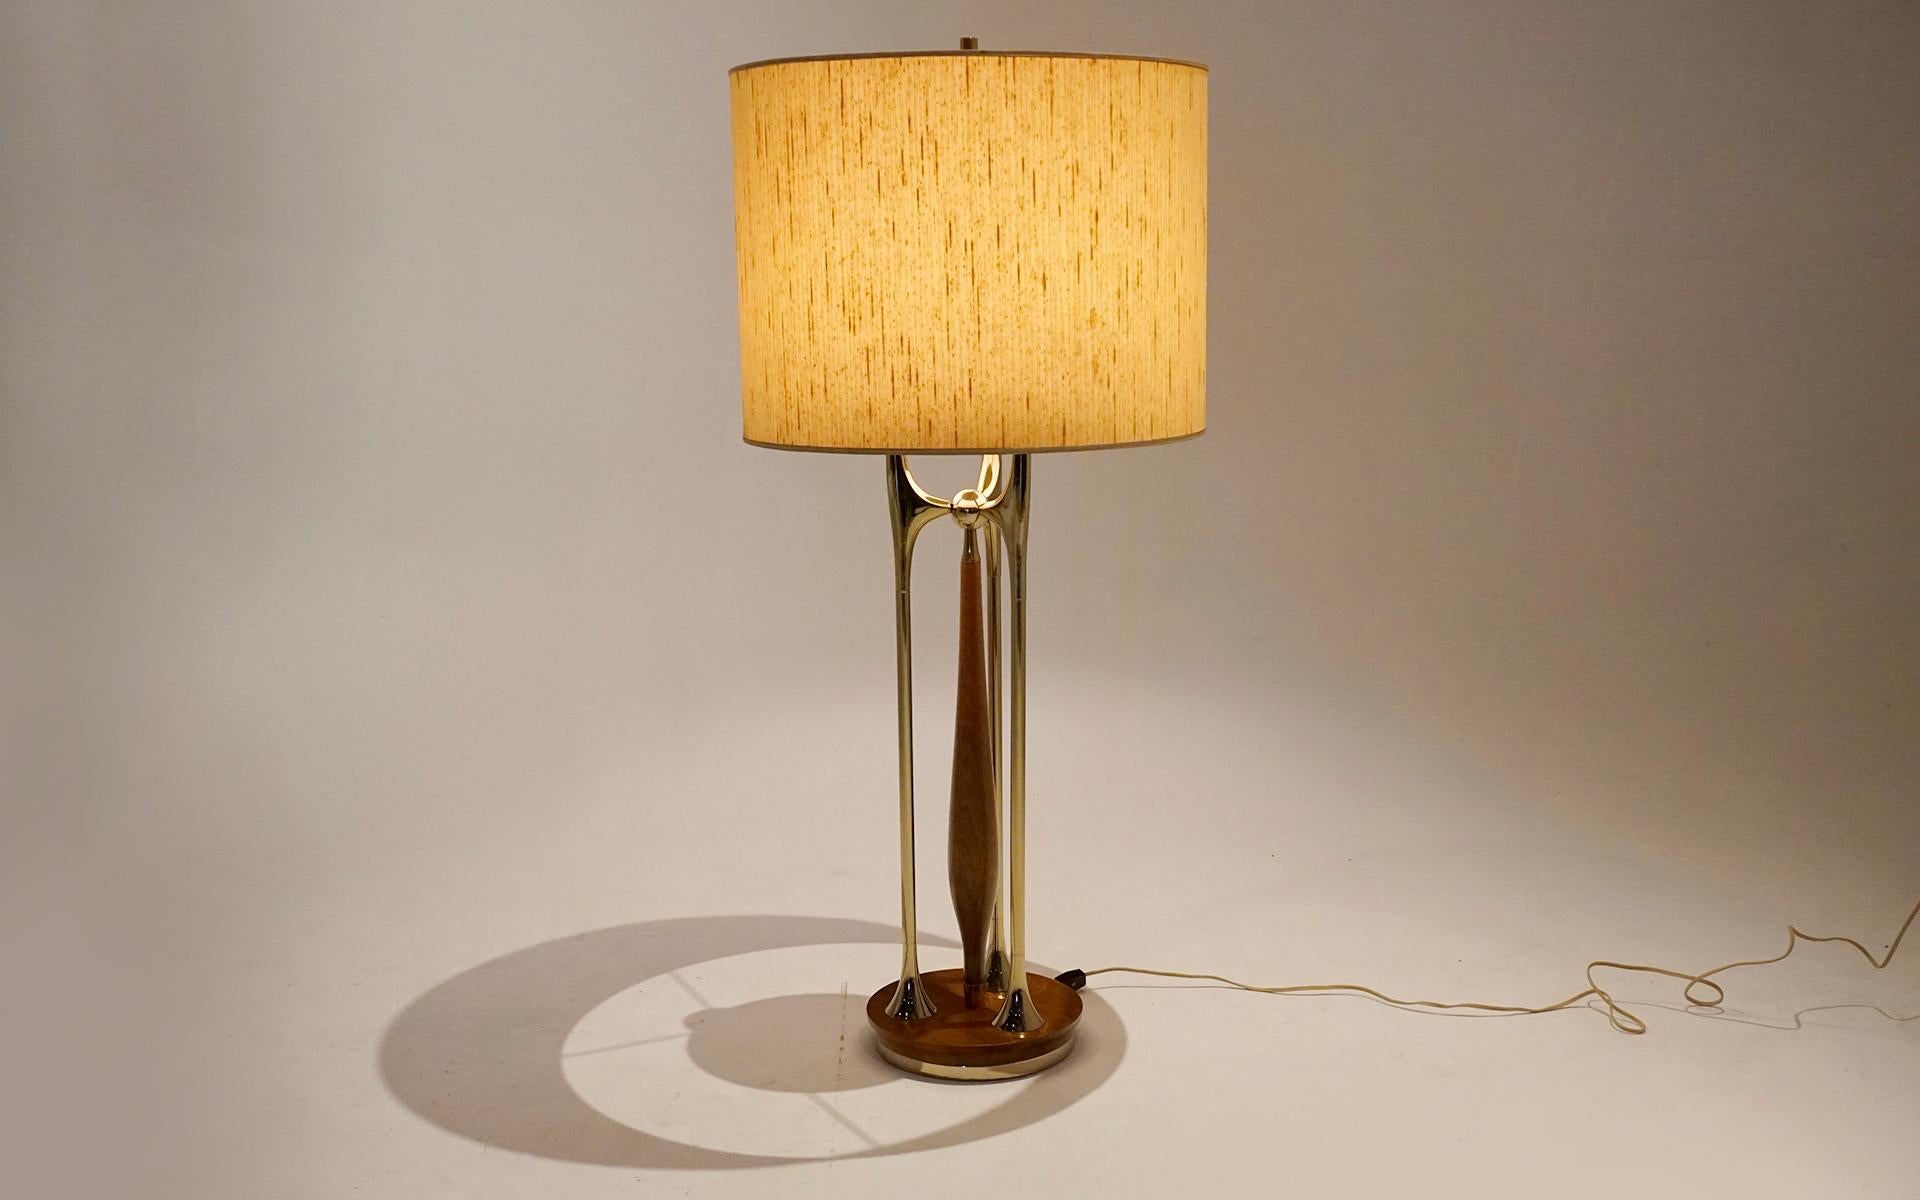 Tall Table Lamp in Brass and Walnut with Original Shade, Possibly Stiffel In Good Condition For Sale In Kansas City, MO